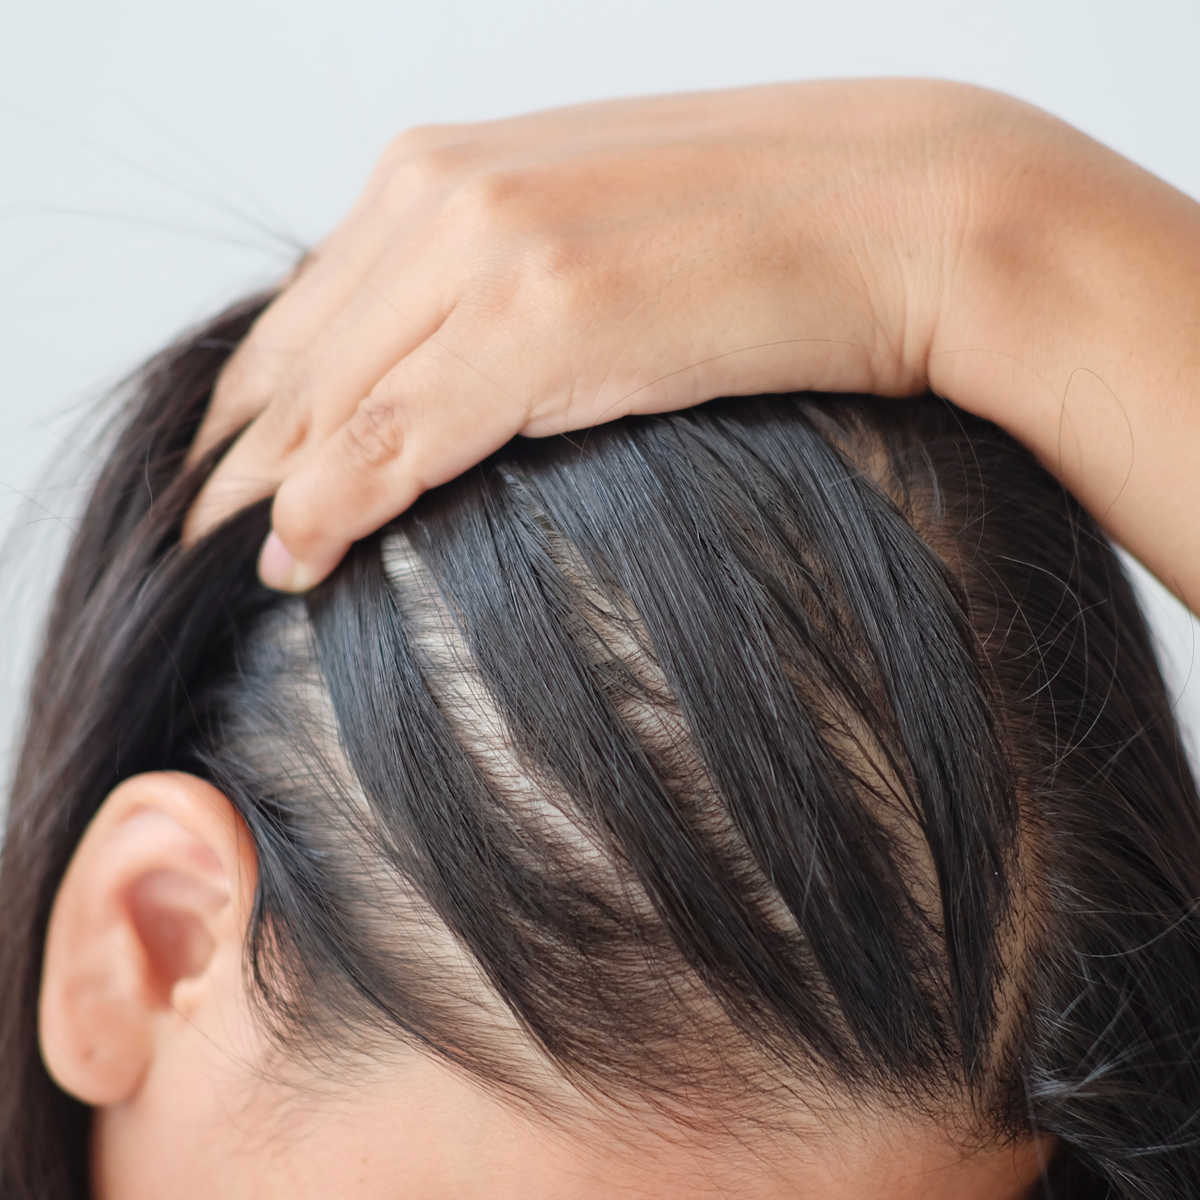 Hair Experts Tell Us How To Grow Thicker Hair - SHEfinds